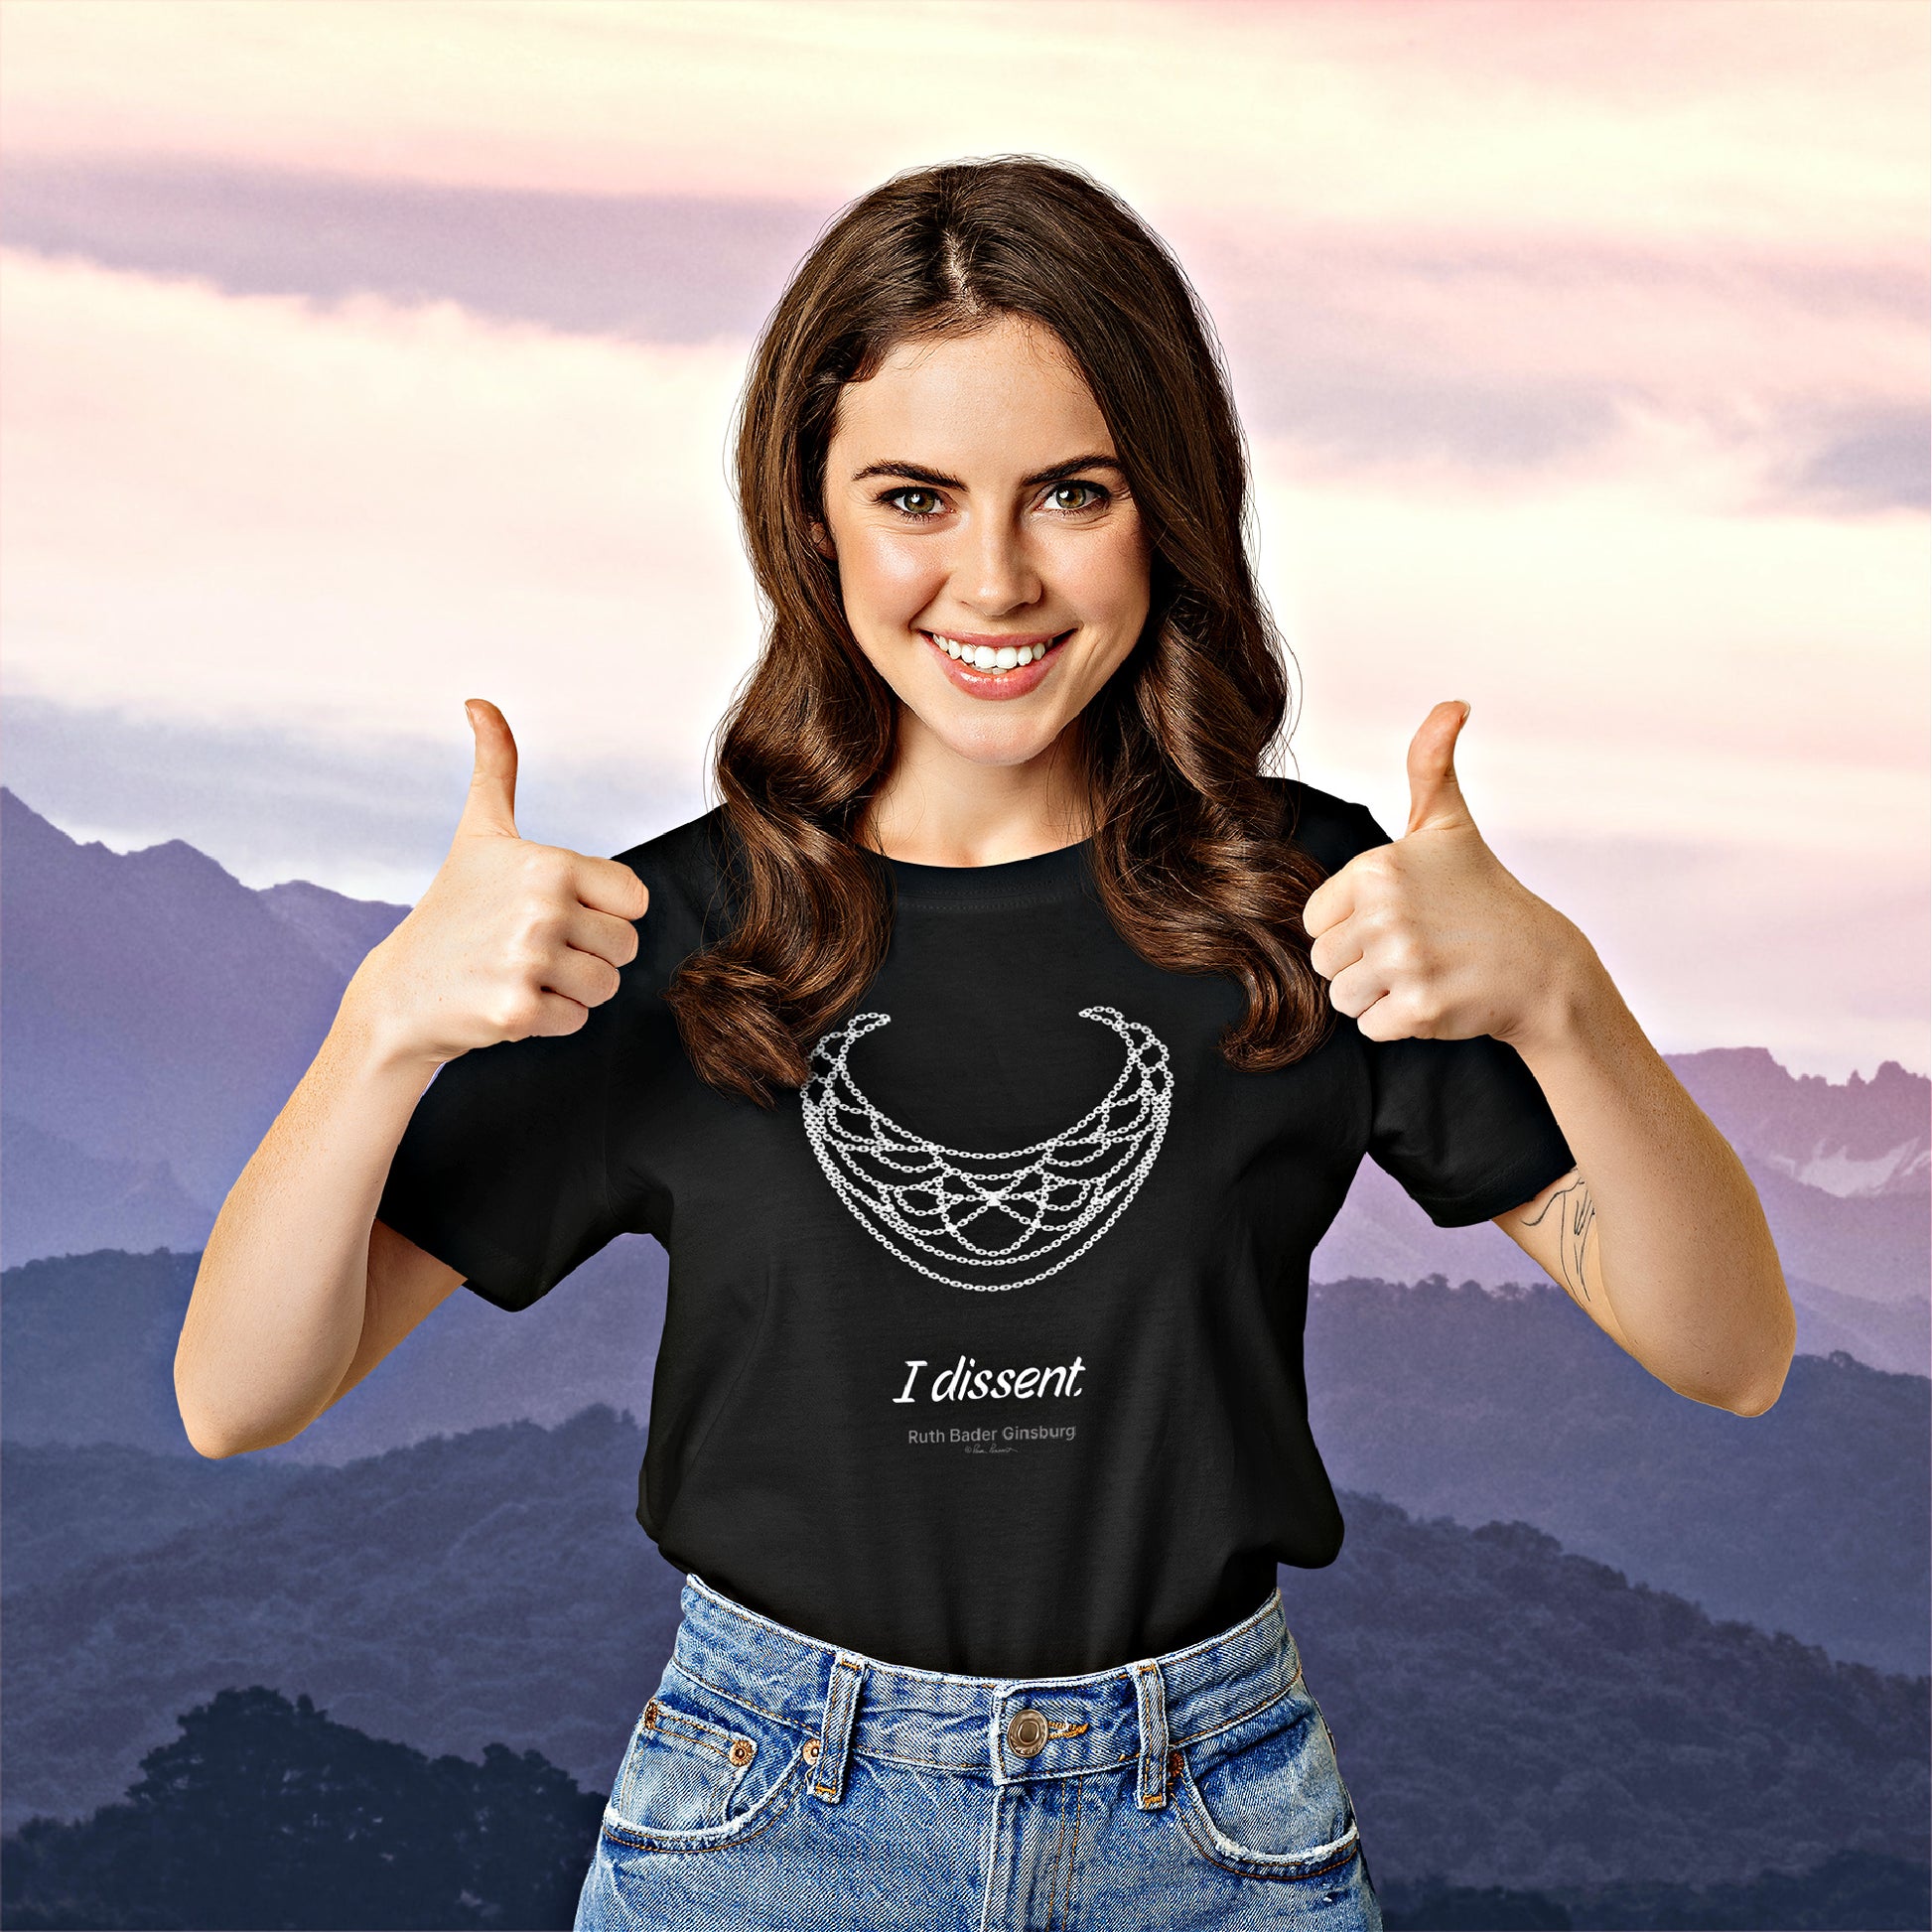 Mock up of a happy woman showing 2 thumbs up while wearing our unisex RBG T-shirt